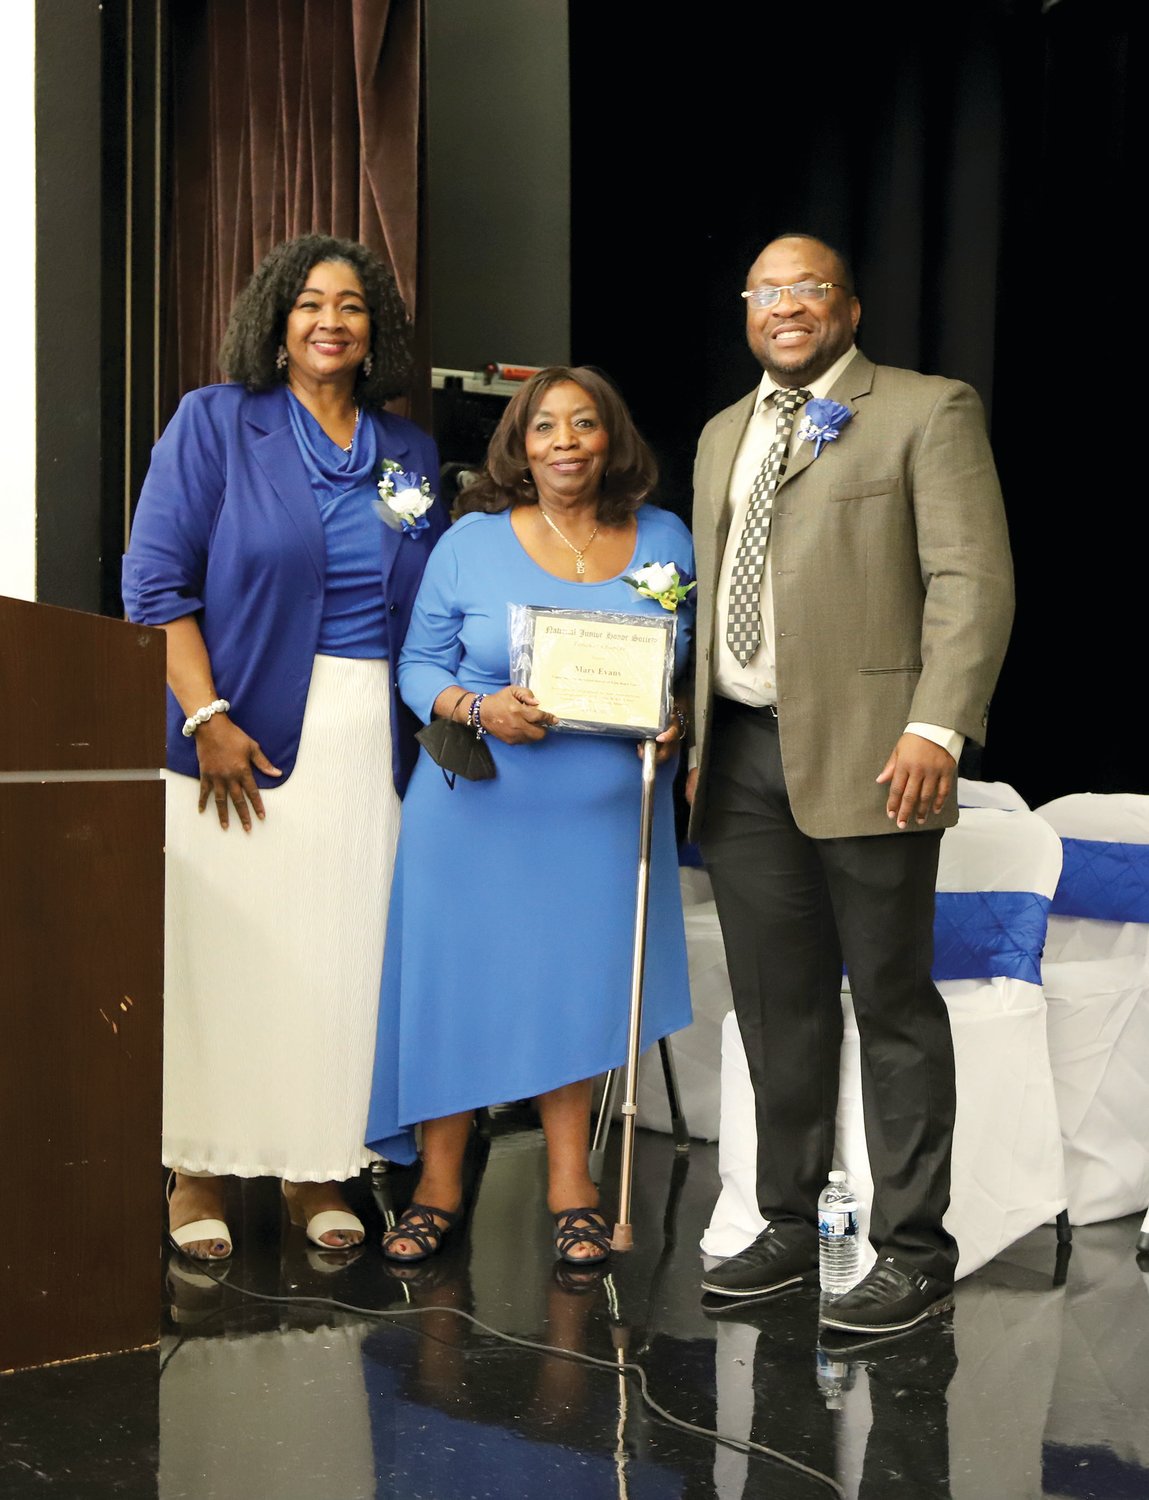 Left to right: Ms. Machele Martin - NJHS Adviser, Ms. Mary Evans - consultant with the School District of Palm Beach County, and Pahokee Middle High School Principal, Mr. Dwayne Dennard.